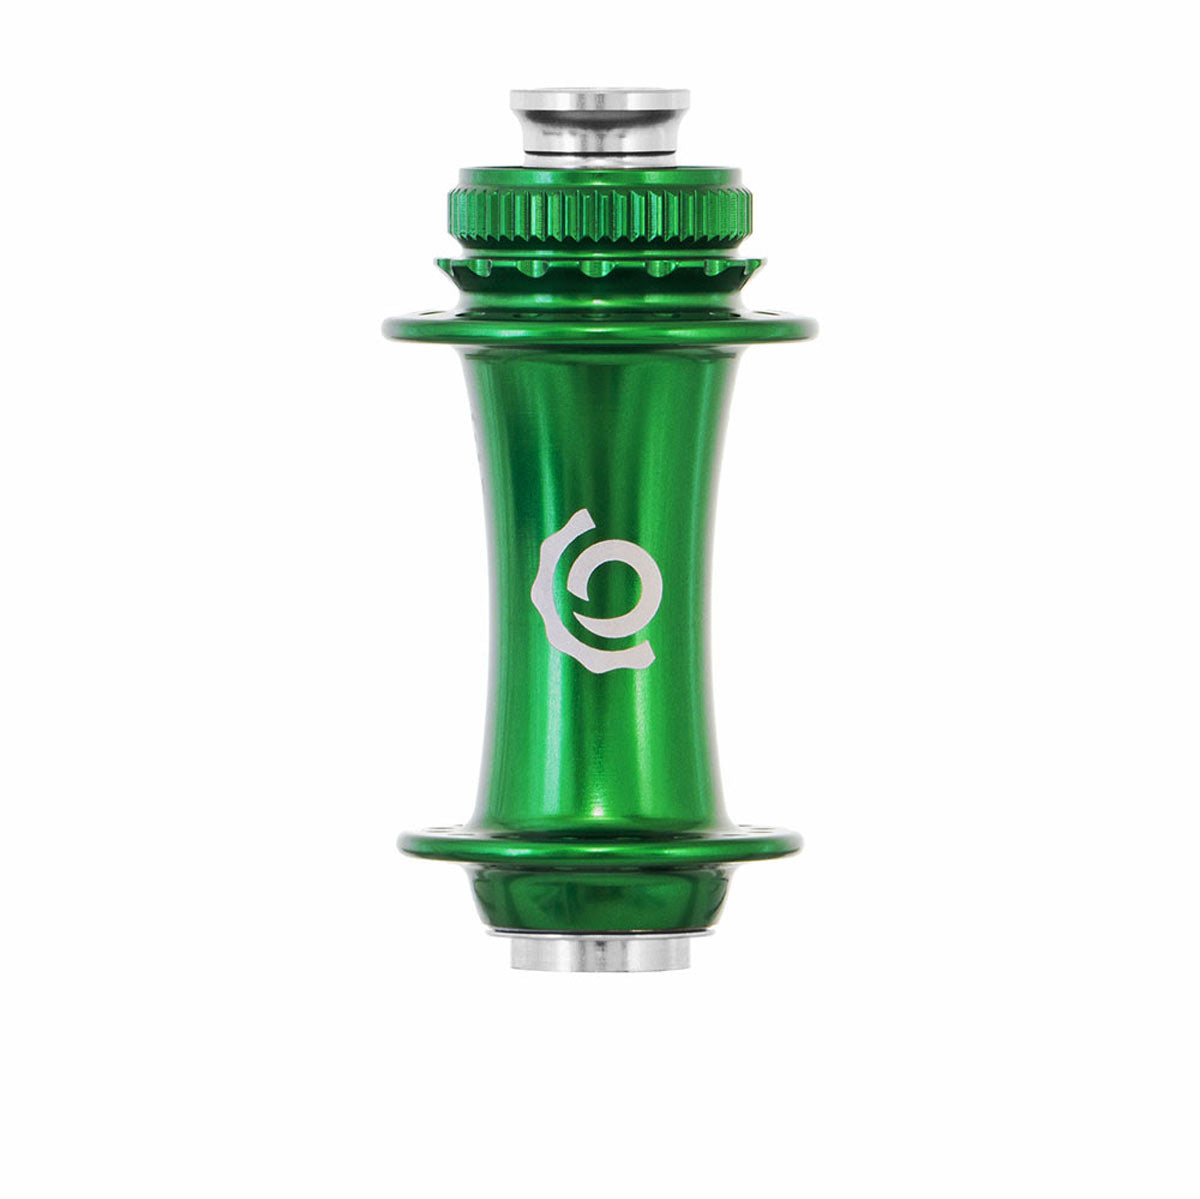 Industry Nine Classic Road Disc CL Hub - Front- 24h - Green - 12x100mm